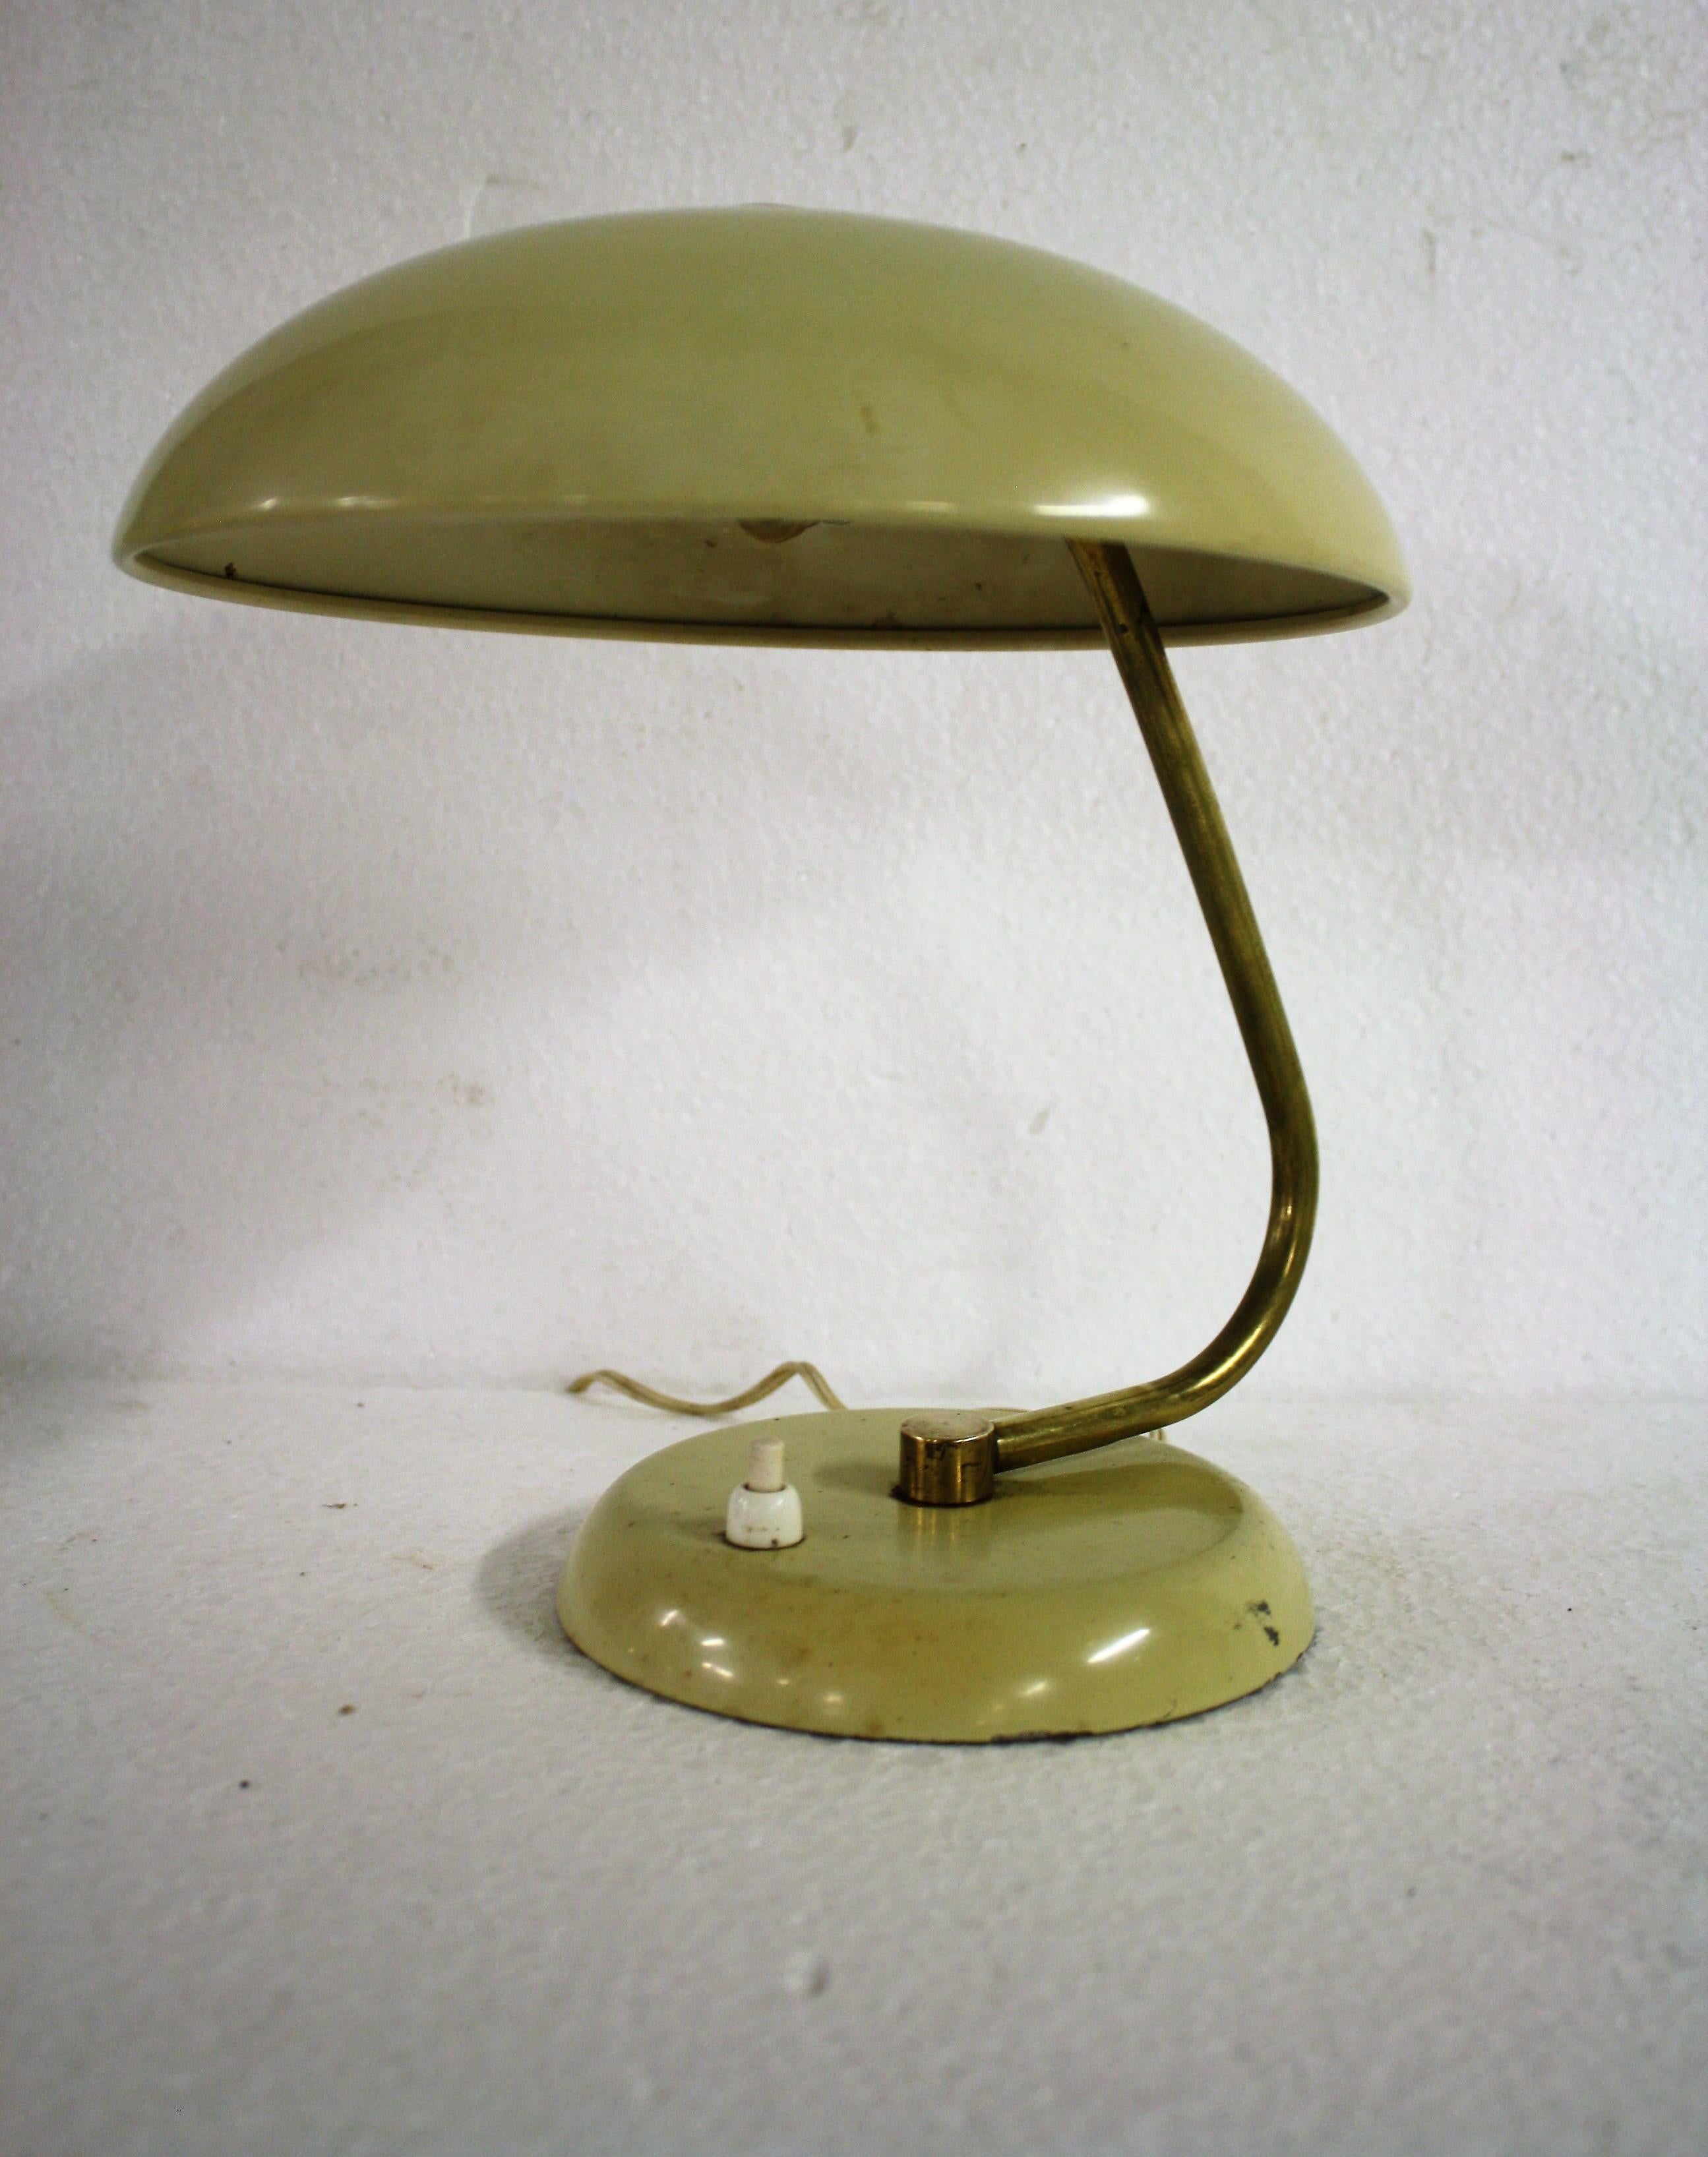 Late Bauhaus period beige table lamp with a brass arm.

The shade is adjustable, making it very useful as a desk lamp, a work light or even a bedside table lamp.

The lamp has some user traces and comes with it's original light bulb